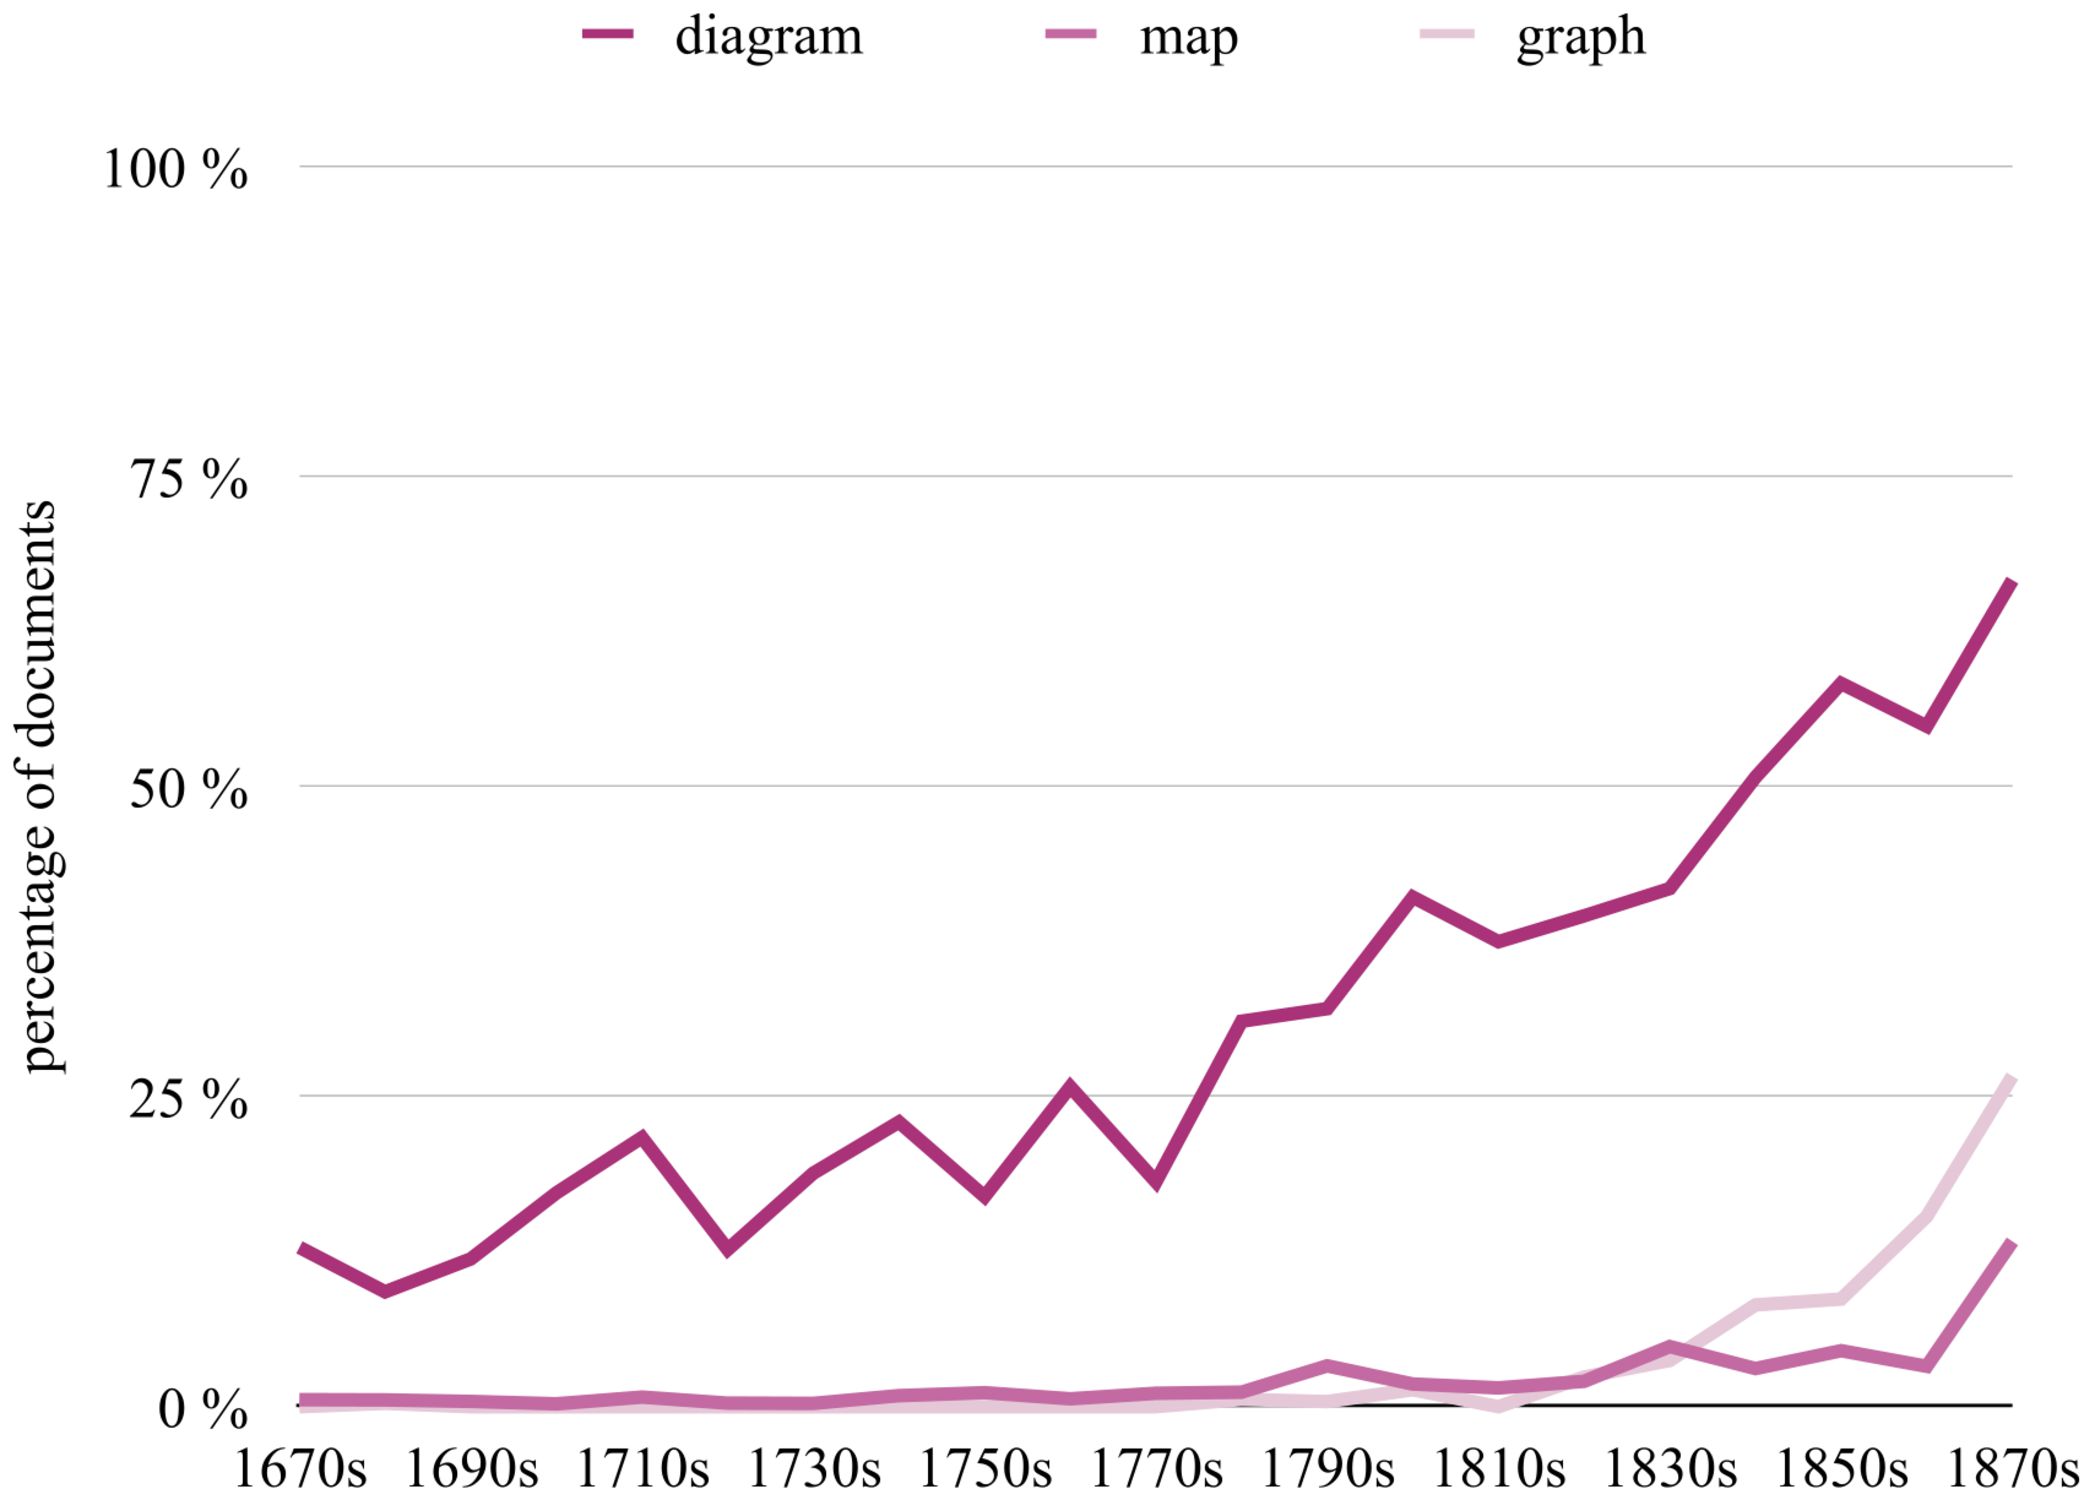 Figure 10.2 Percentage of documents published in the Philosophical Transactions per decade, 1670‒1879